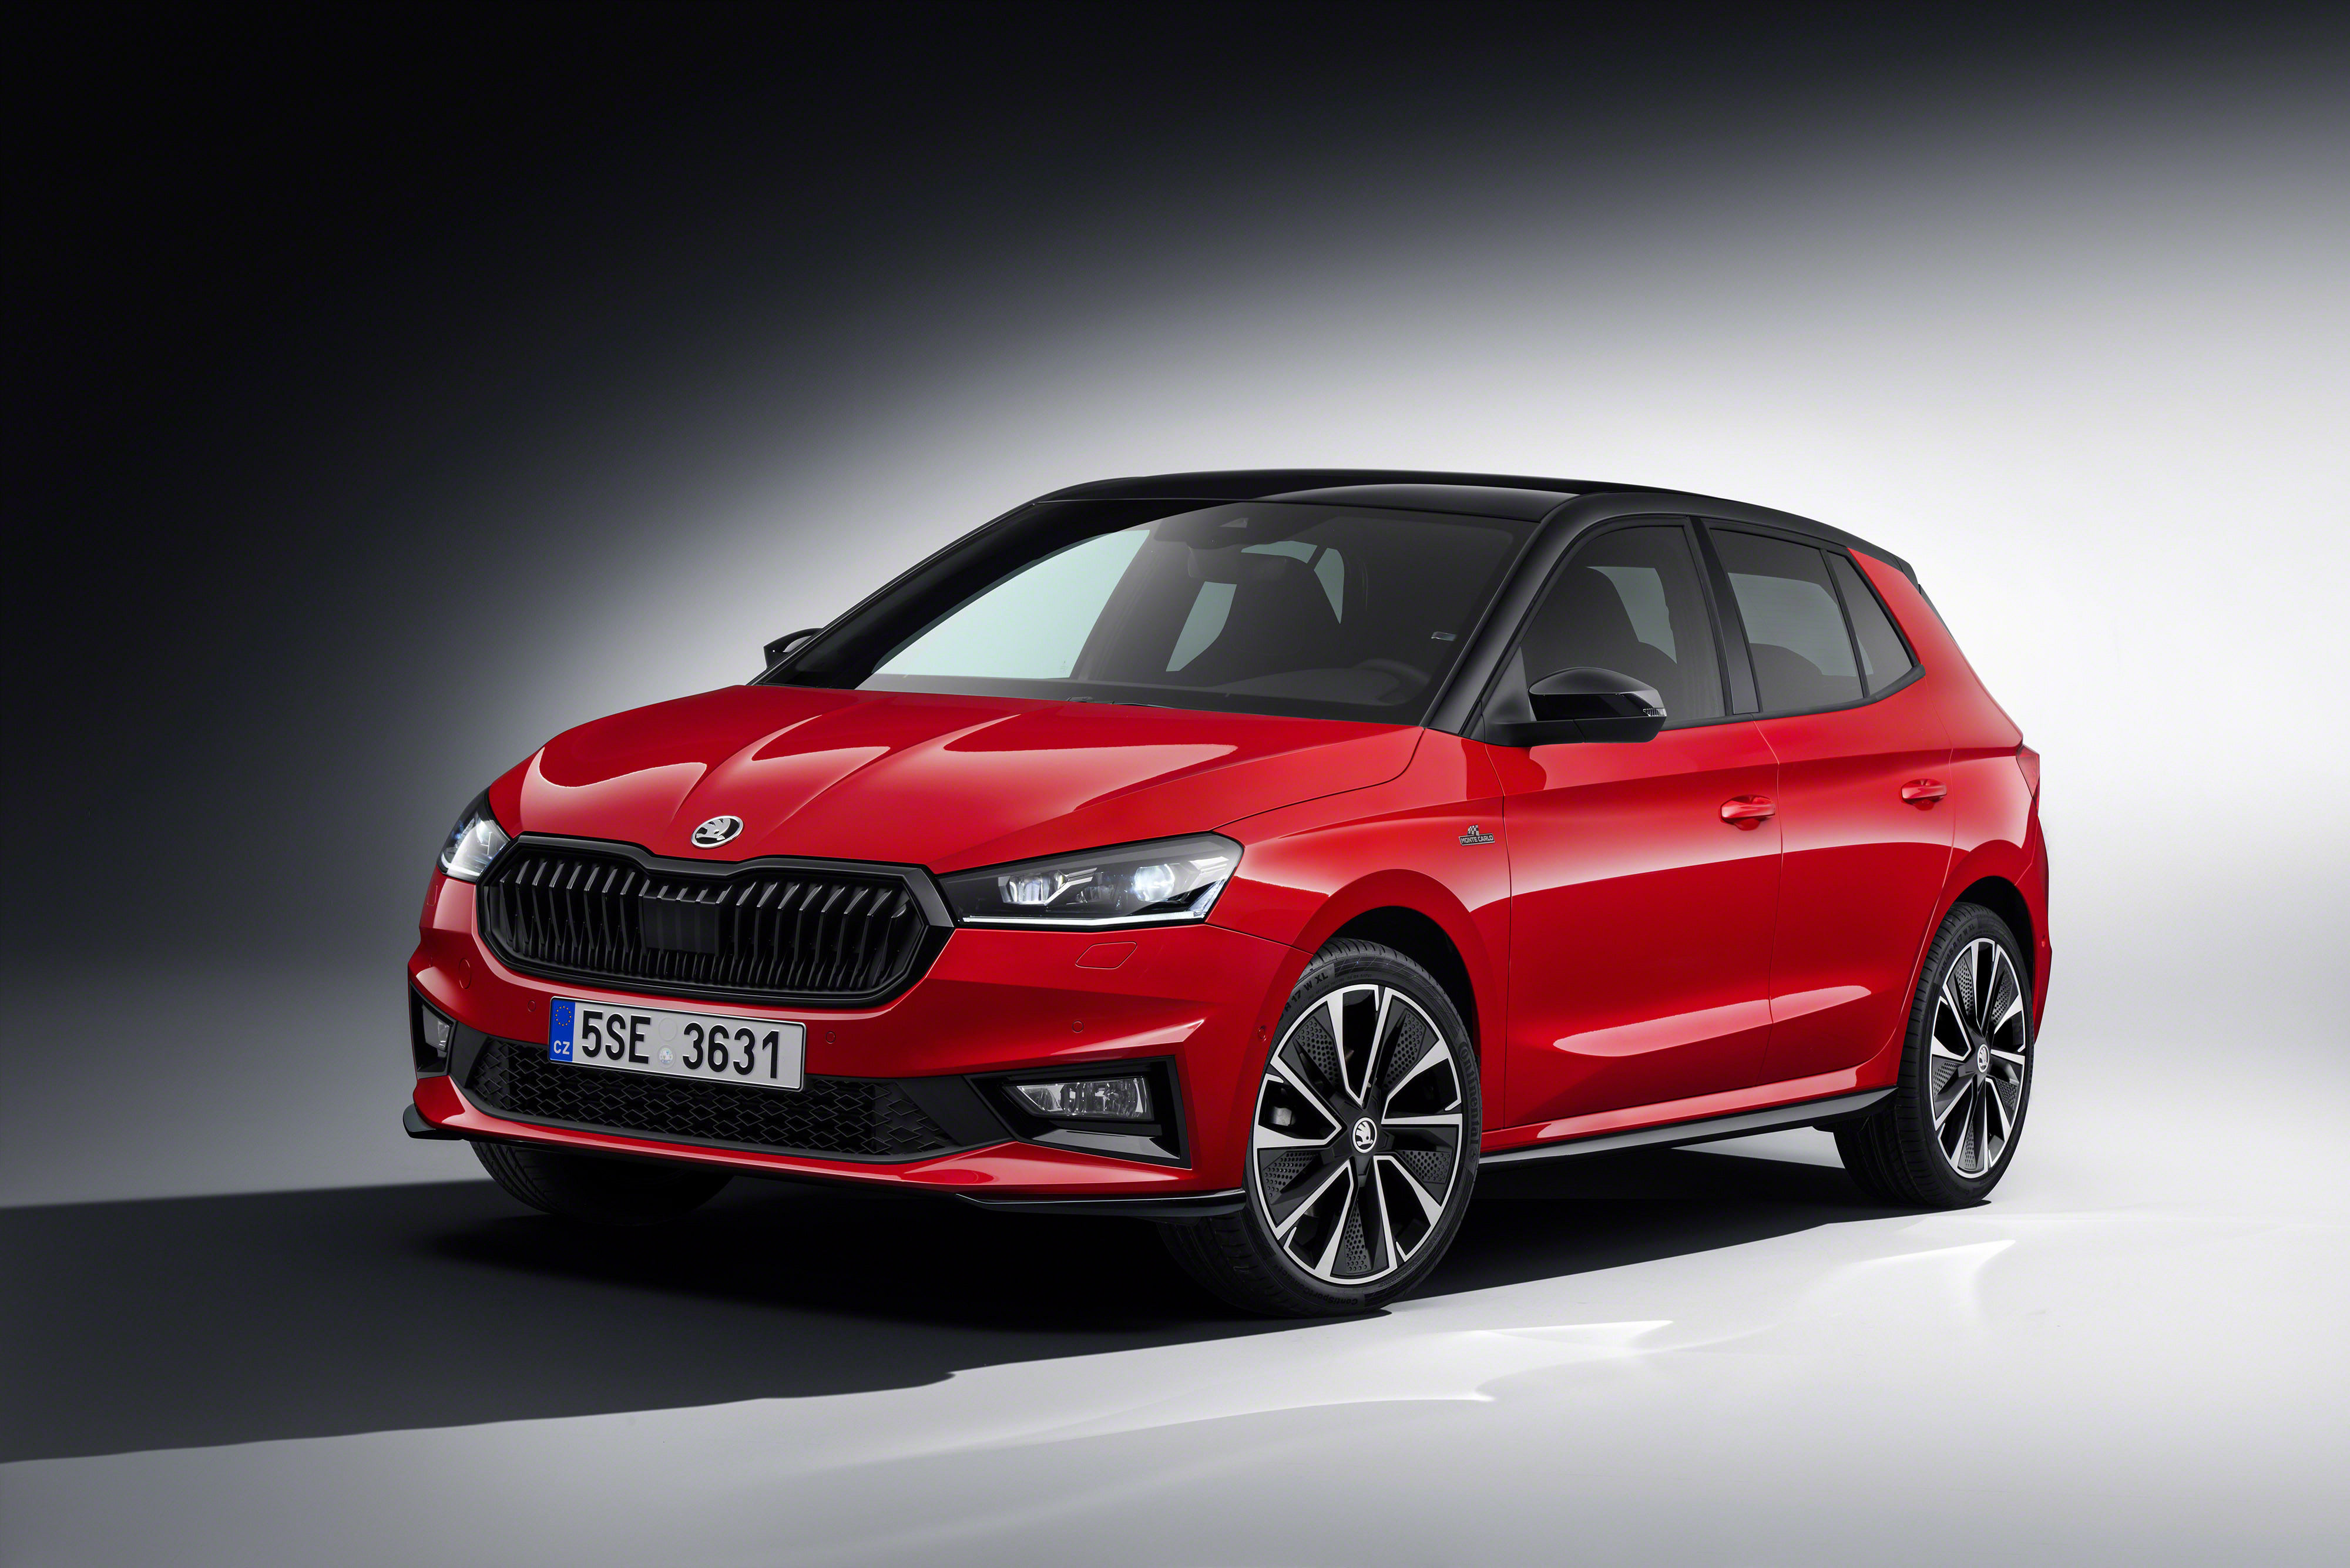 The ŠKODA FABIA MONTE CARLO: dynamism at its purest